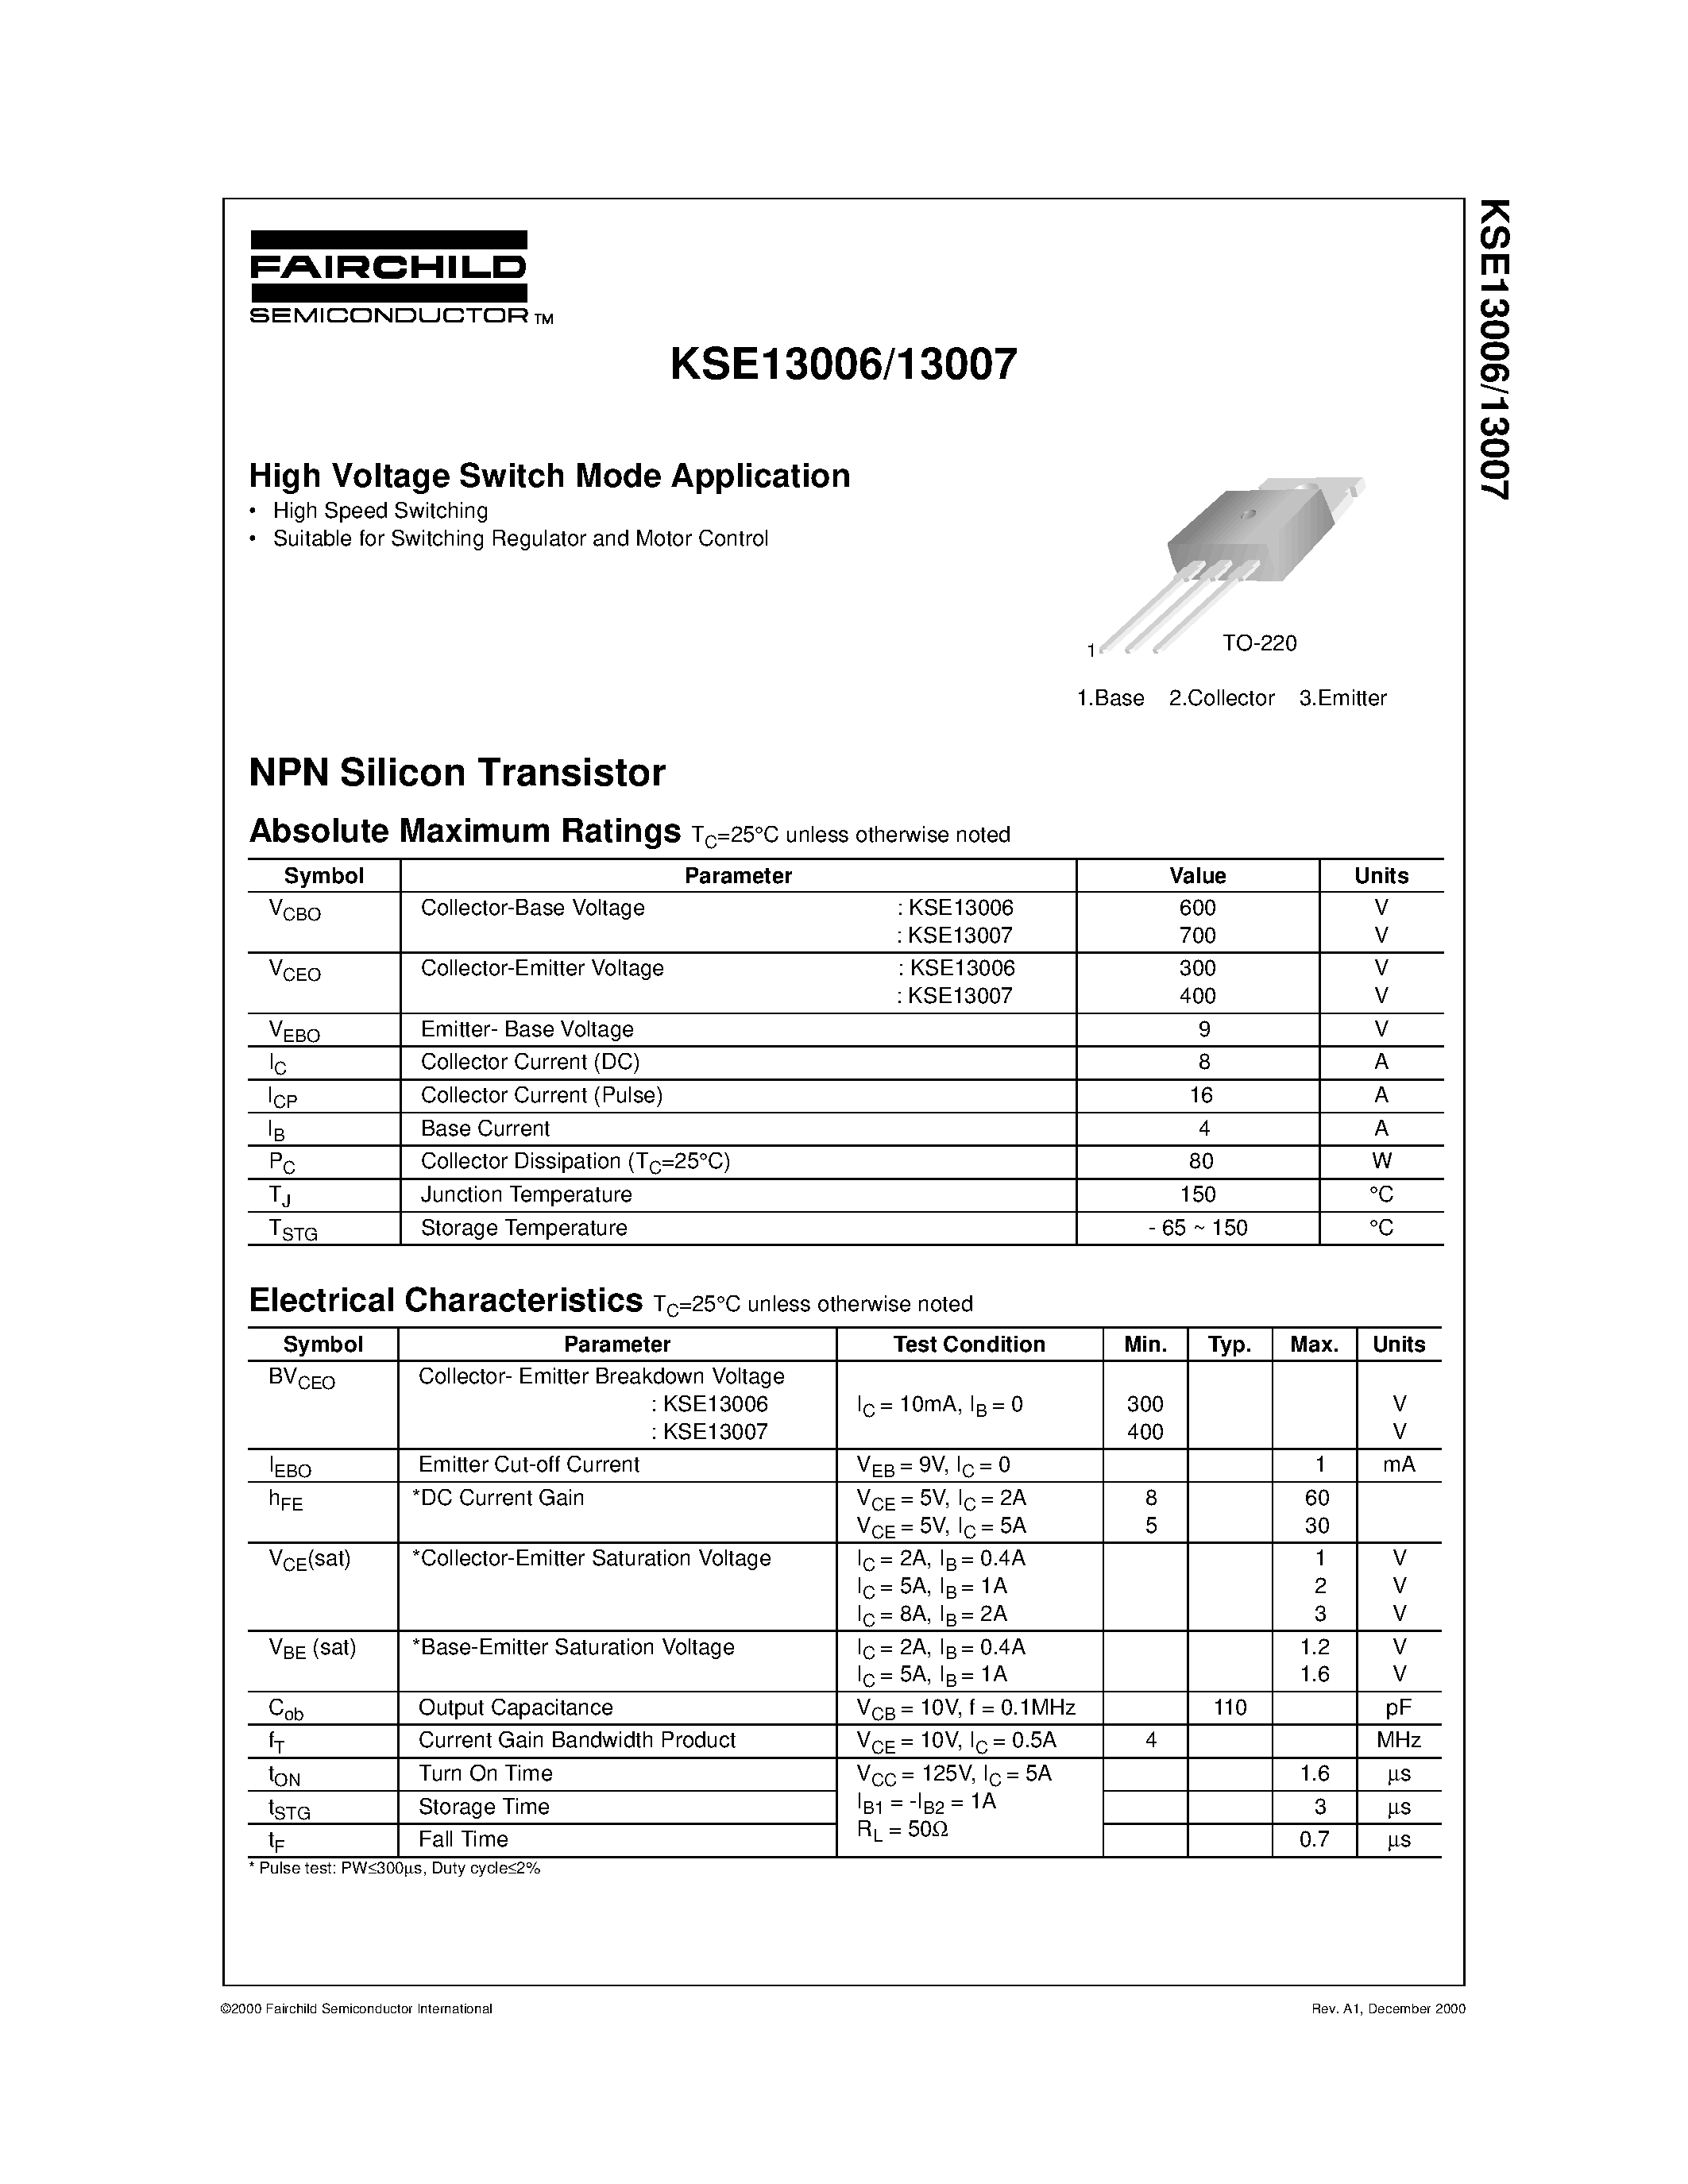 Datasheet KSE13007 - High Voltage Switch Mode Application page 1